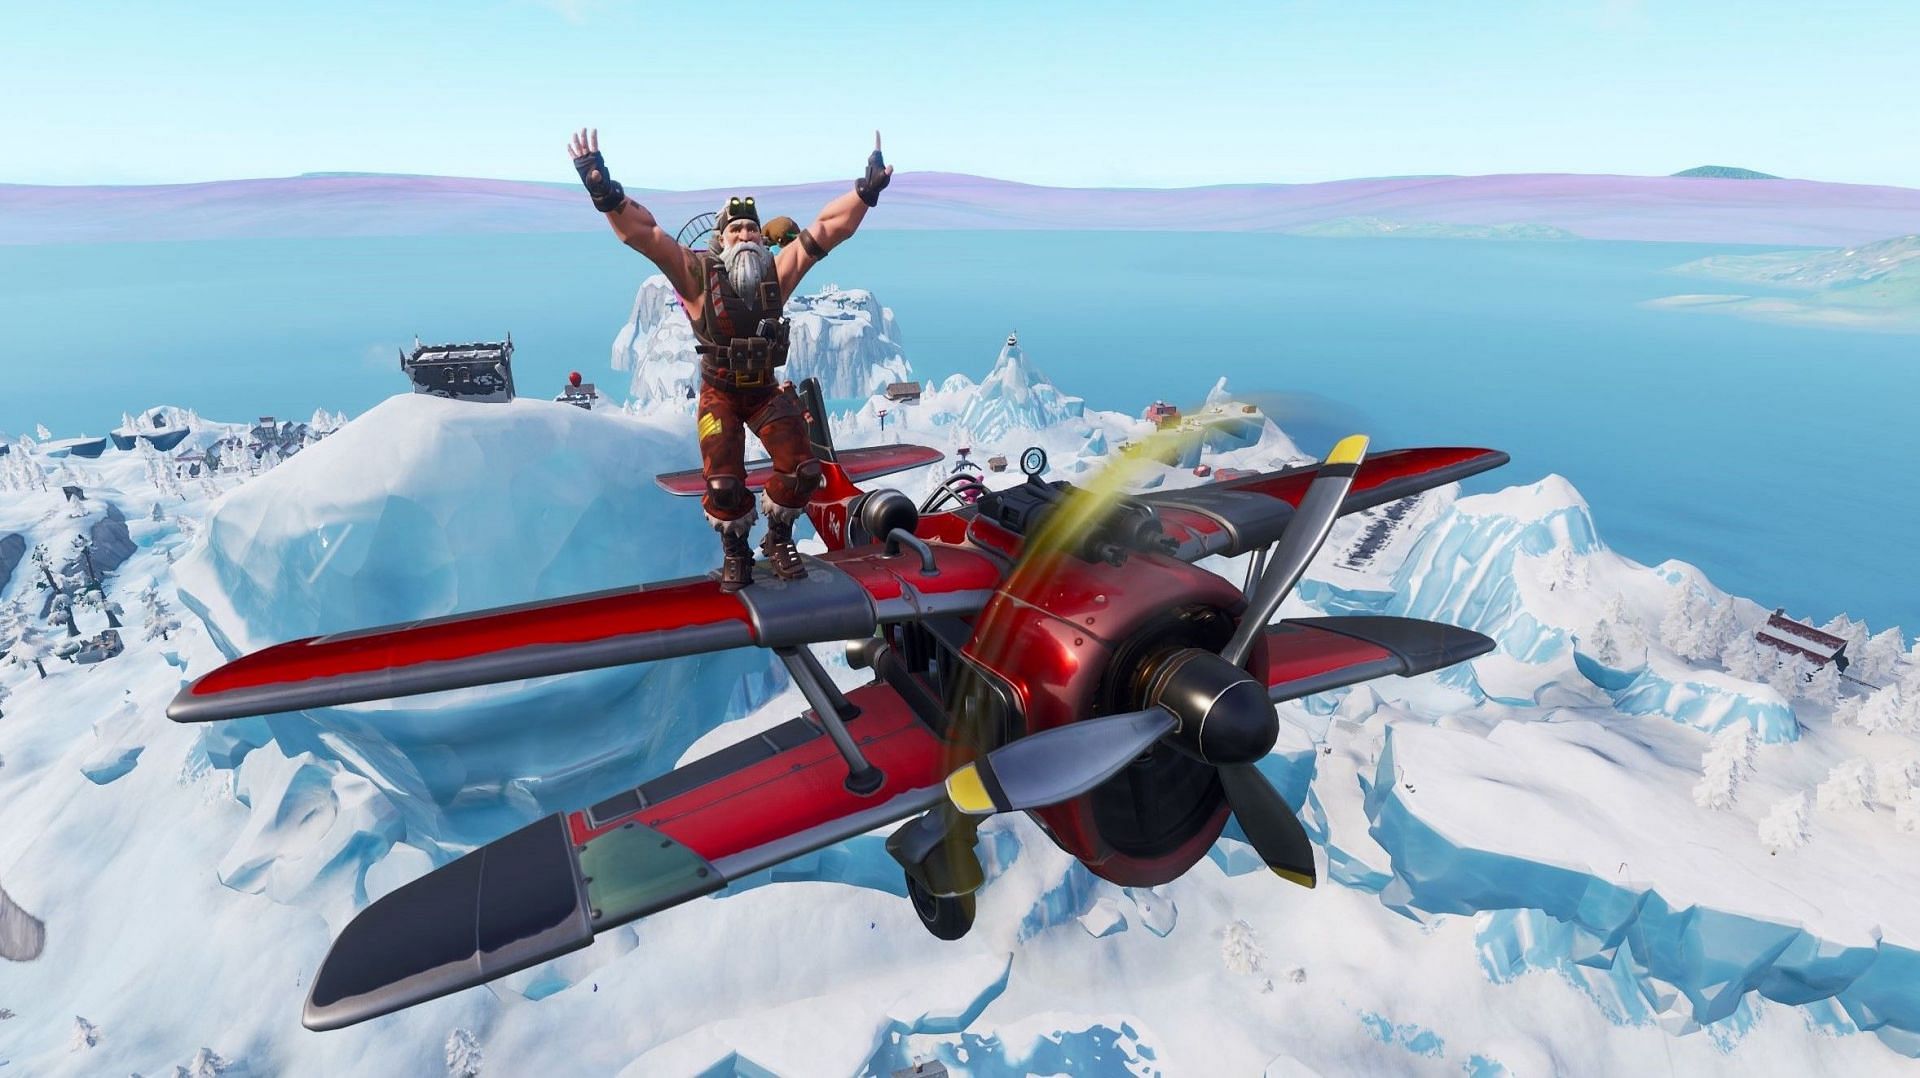 Planes made a brief appearance during the Winterfest 2020 event (Image via Epic Games)